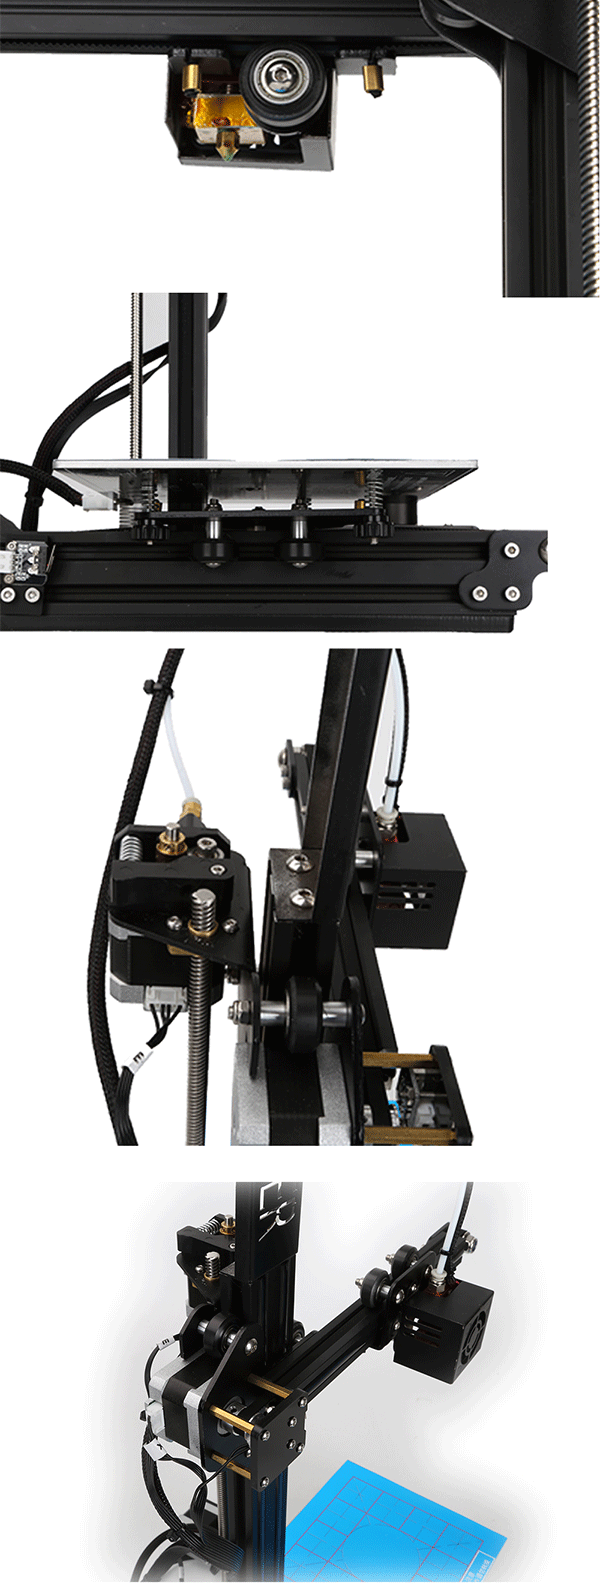 Creality 3D® Ender-2 DIY 3D Printer Kit 150*150*200mm Printing Size With Auto Leveling 1.75mm 0.4mm Nozzle 24